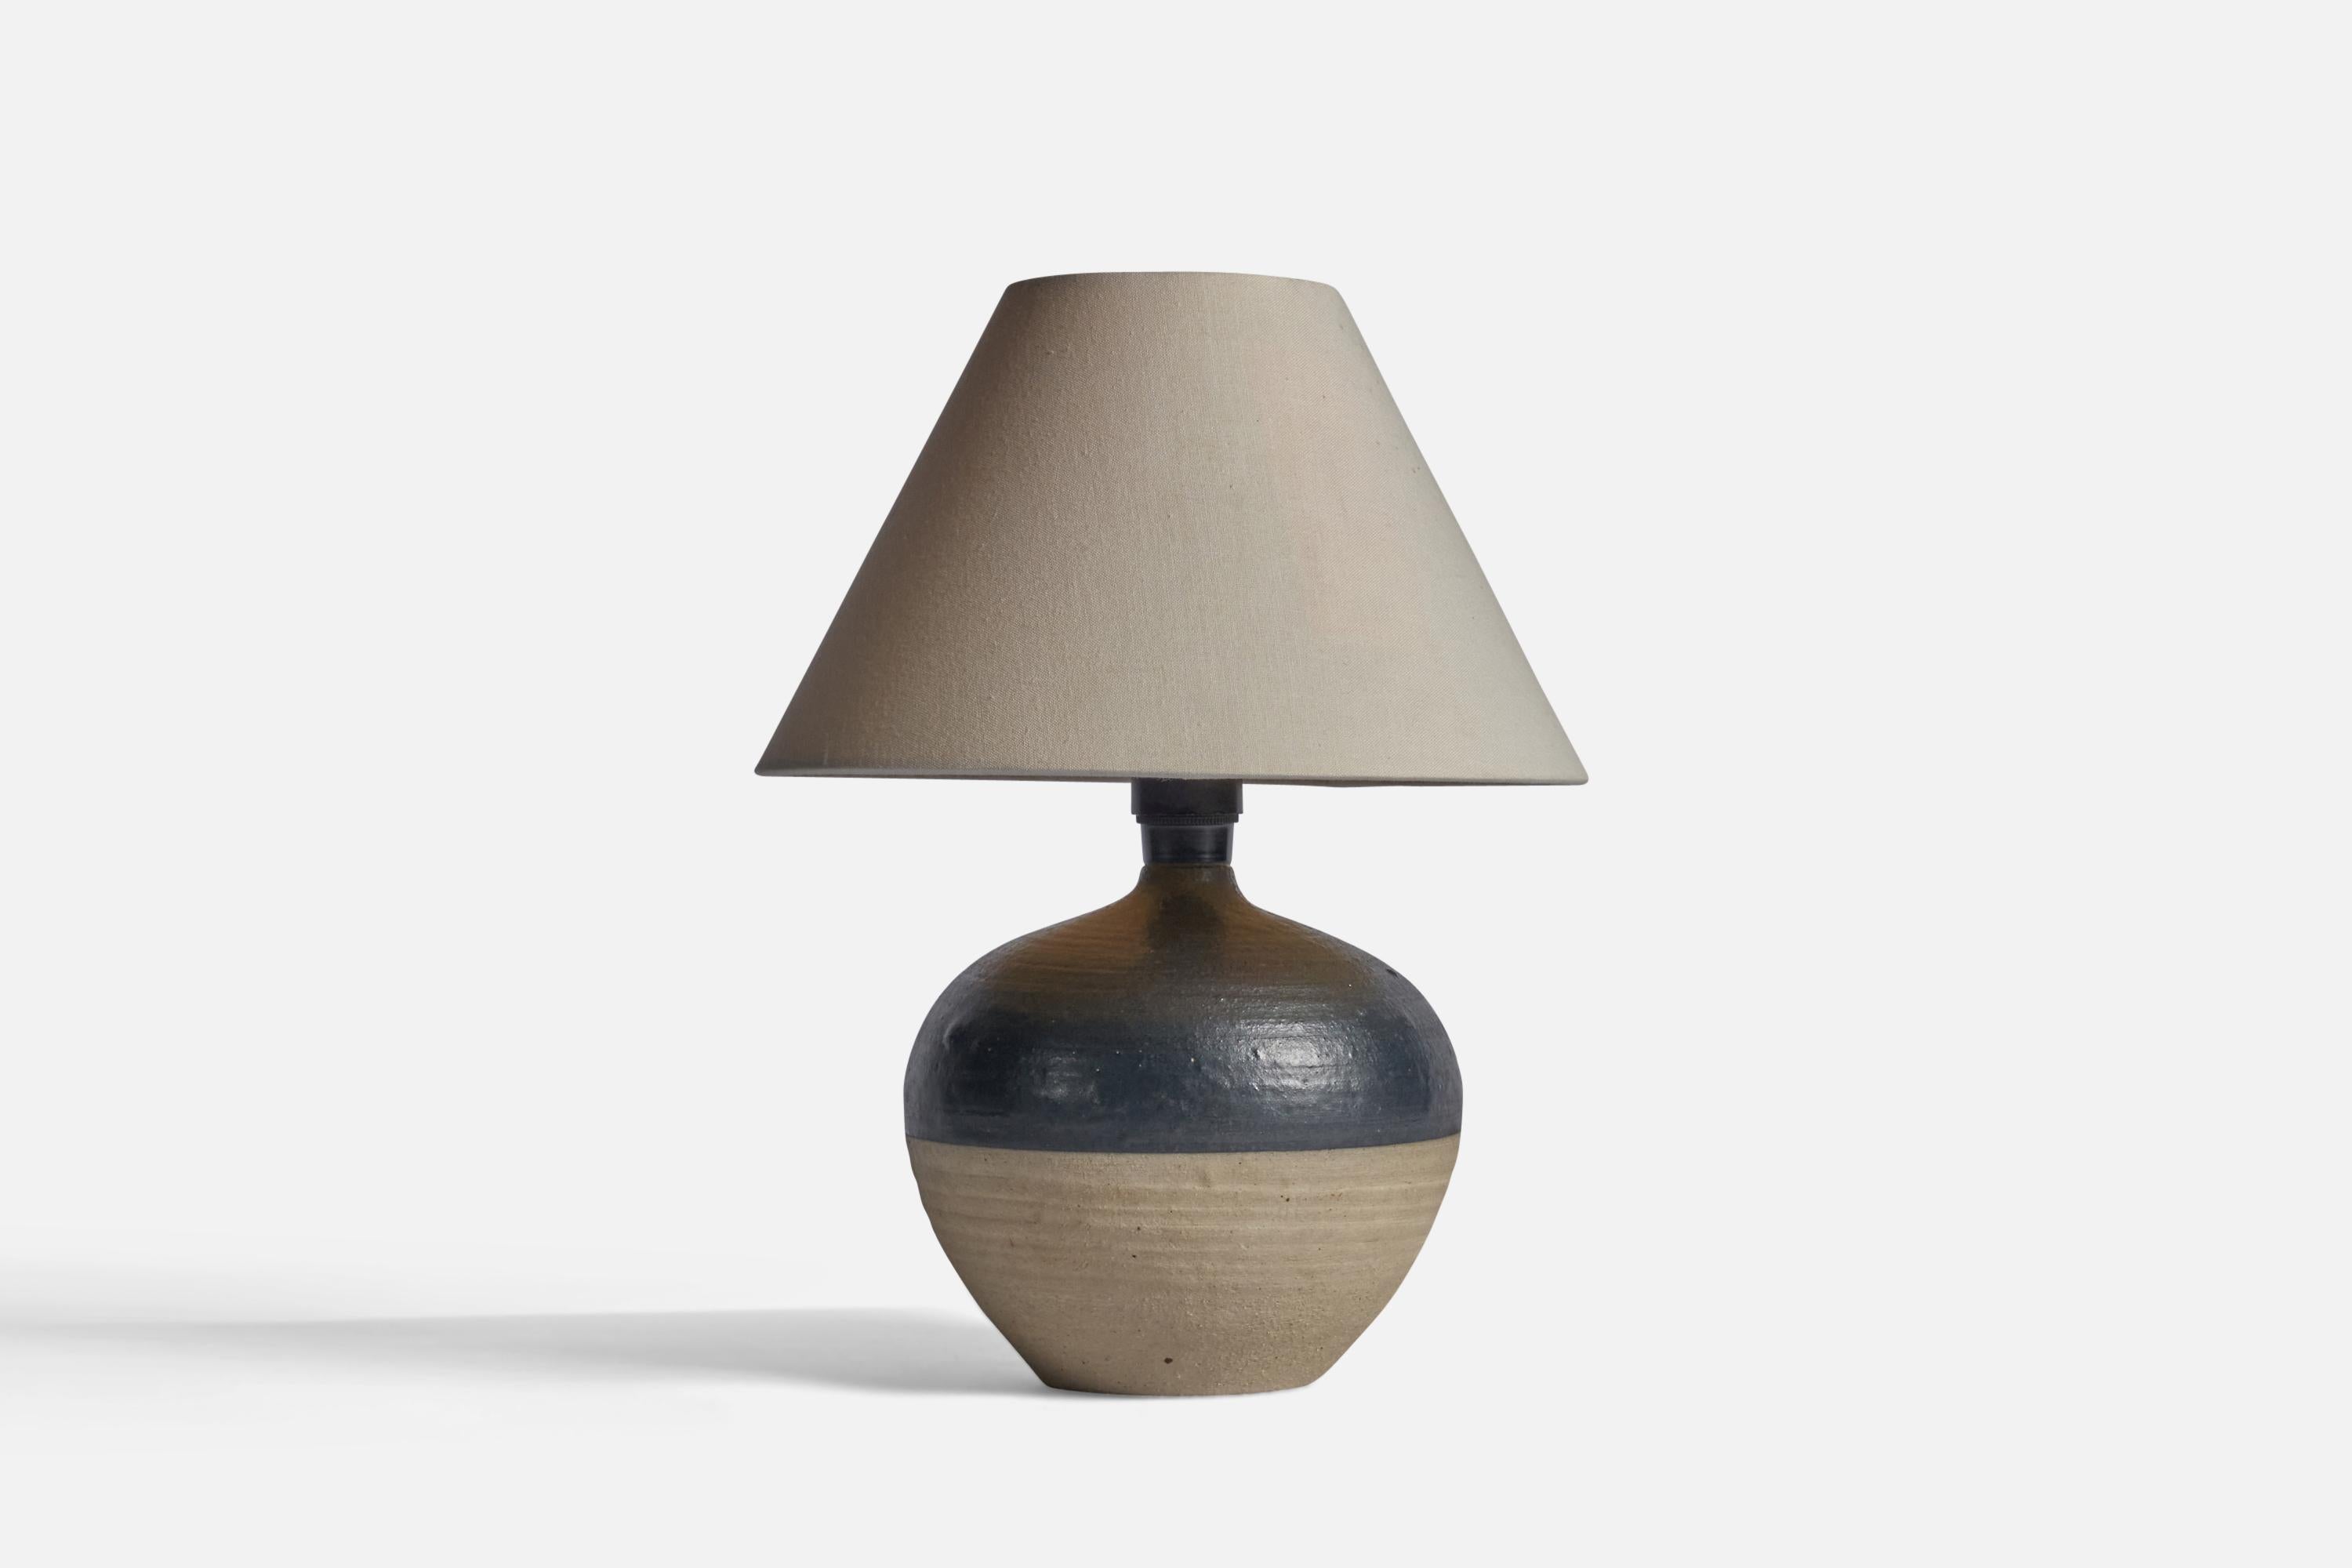 A black and grey-glazed stoneware and fabric table lamp, designed and produced in Denmark, 1960s.

Overall Dimensions (inches): 11